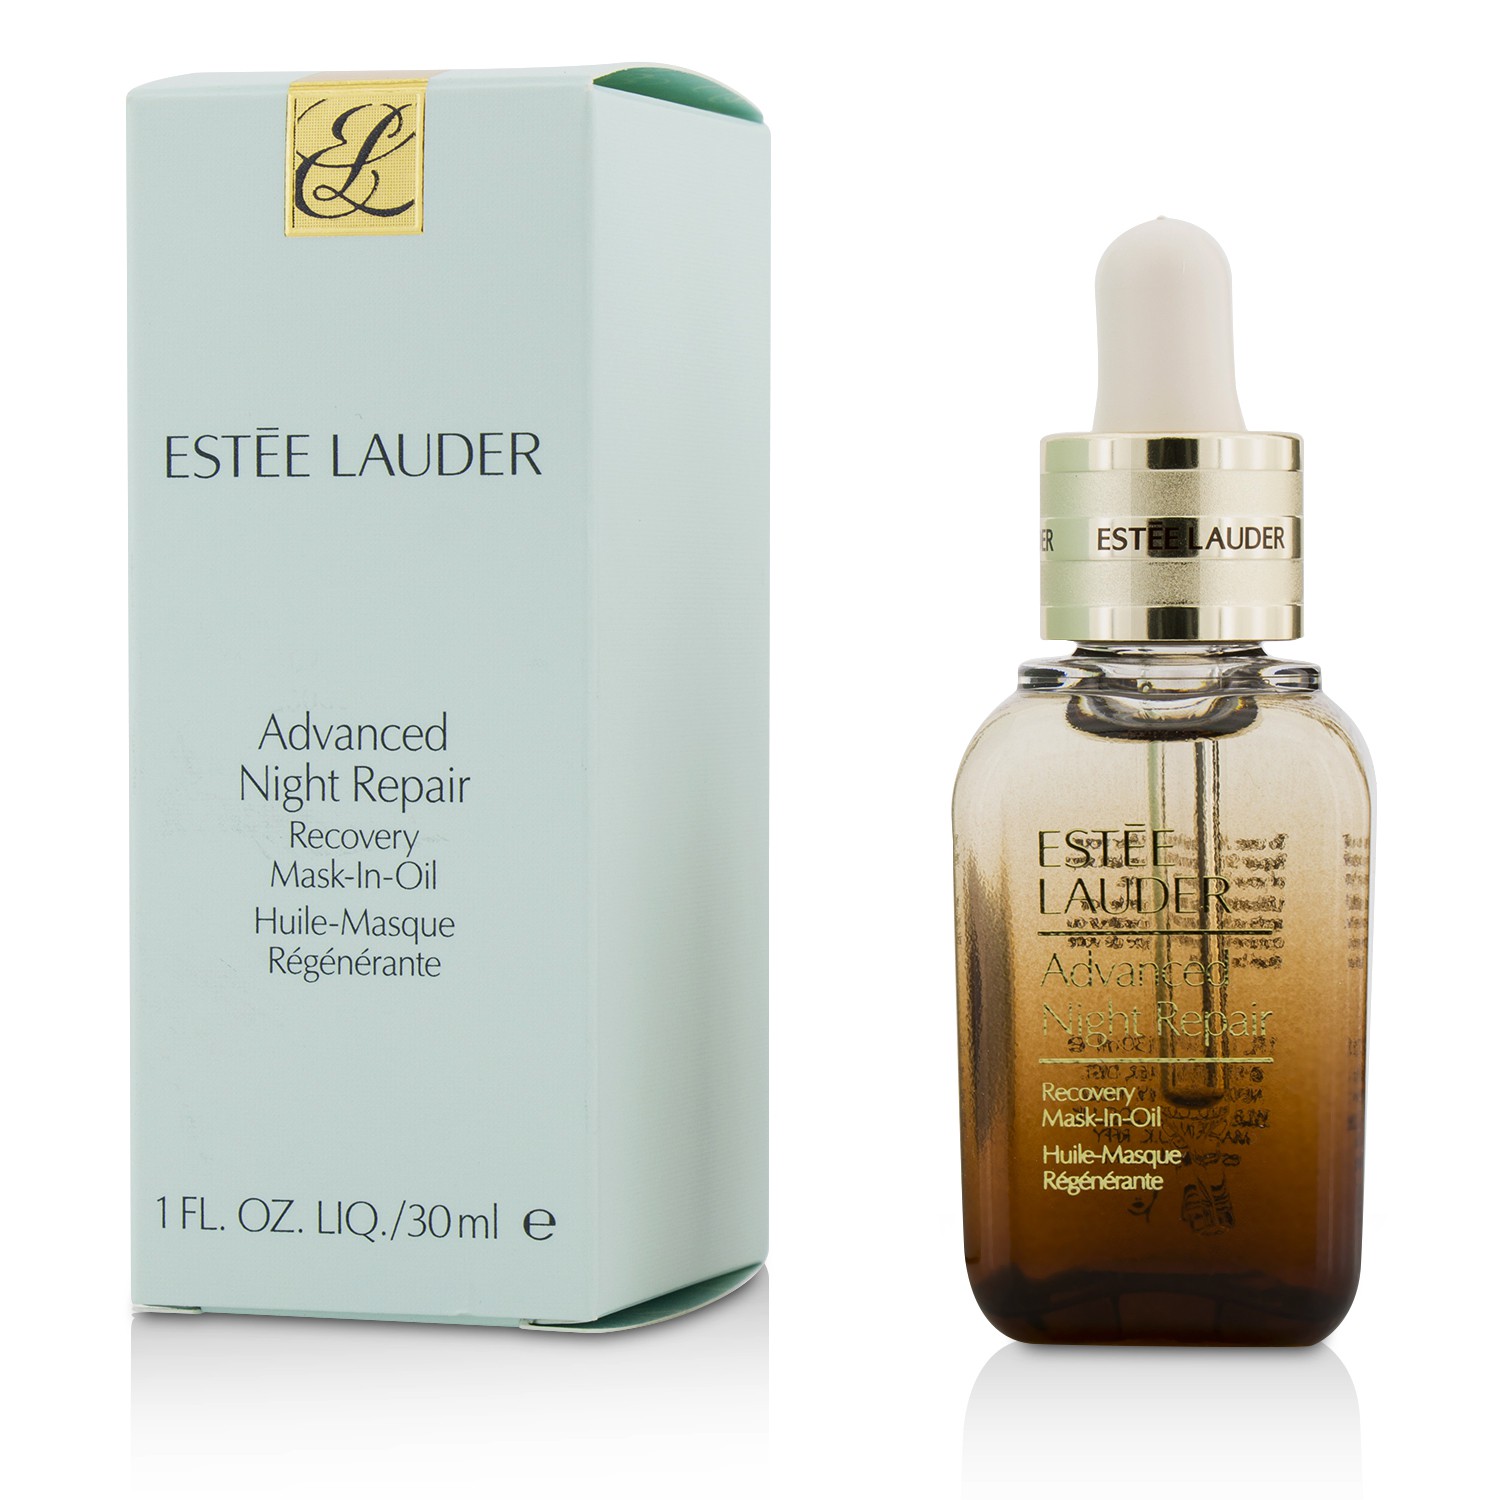 Advanced Night Repair Recovery Mask-In-Oil Estee Lauder Image